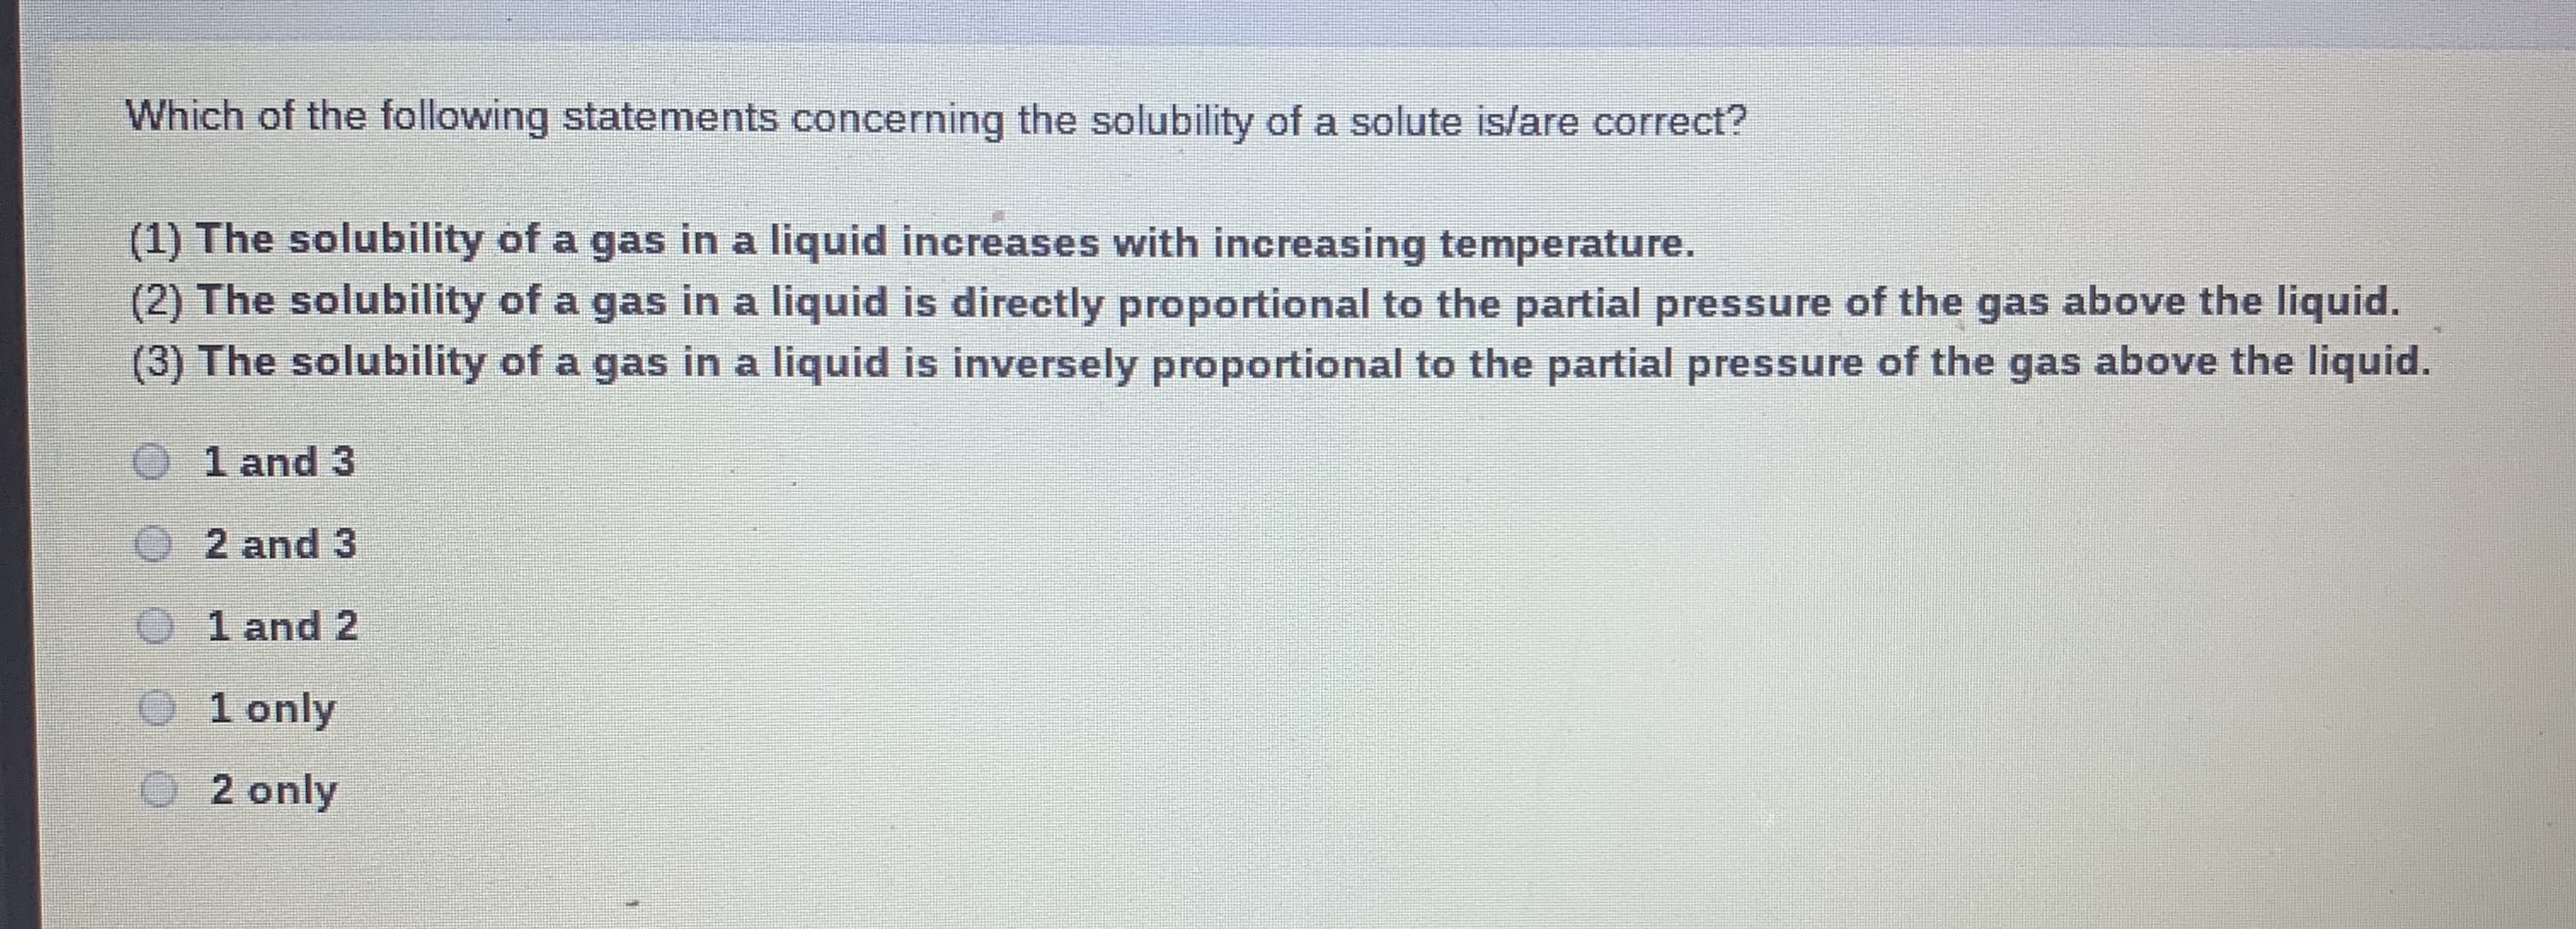 Which of the following statements concerning the solubility of a solute is/are correct?
(1) The solubility of a gas in a liquid increases with increasing temperature.
(2) The solubility of a gas in a liquid is directly proportional to the partial pressure of the gas above the liquid.
(3) The solubility of a gas in a liquid is inversely proportional to the partial pressure of the gas above the liquid.
1 and 3
O2 and 3
O 1 and 2
O 1 only
O2 only
